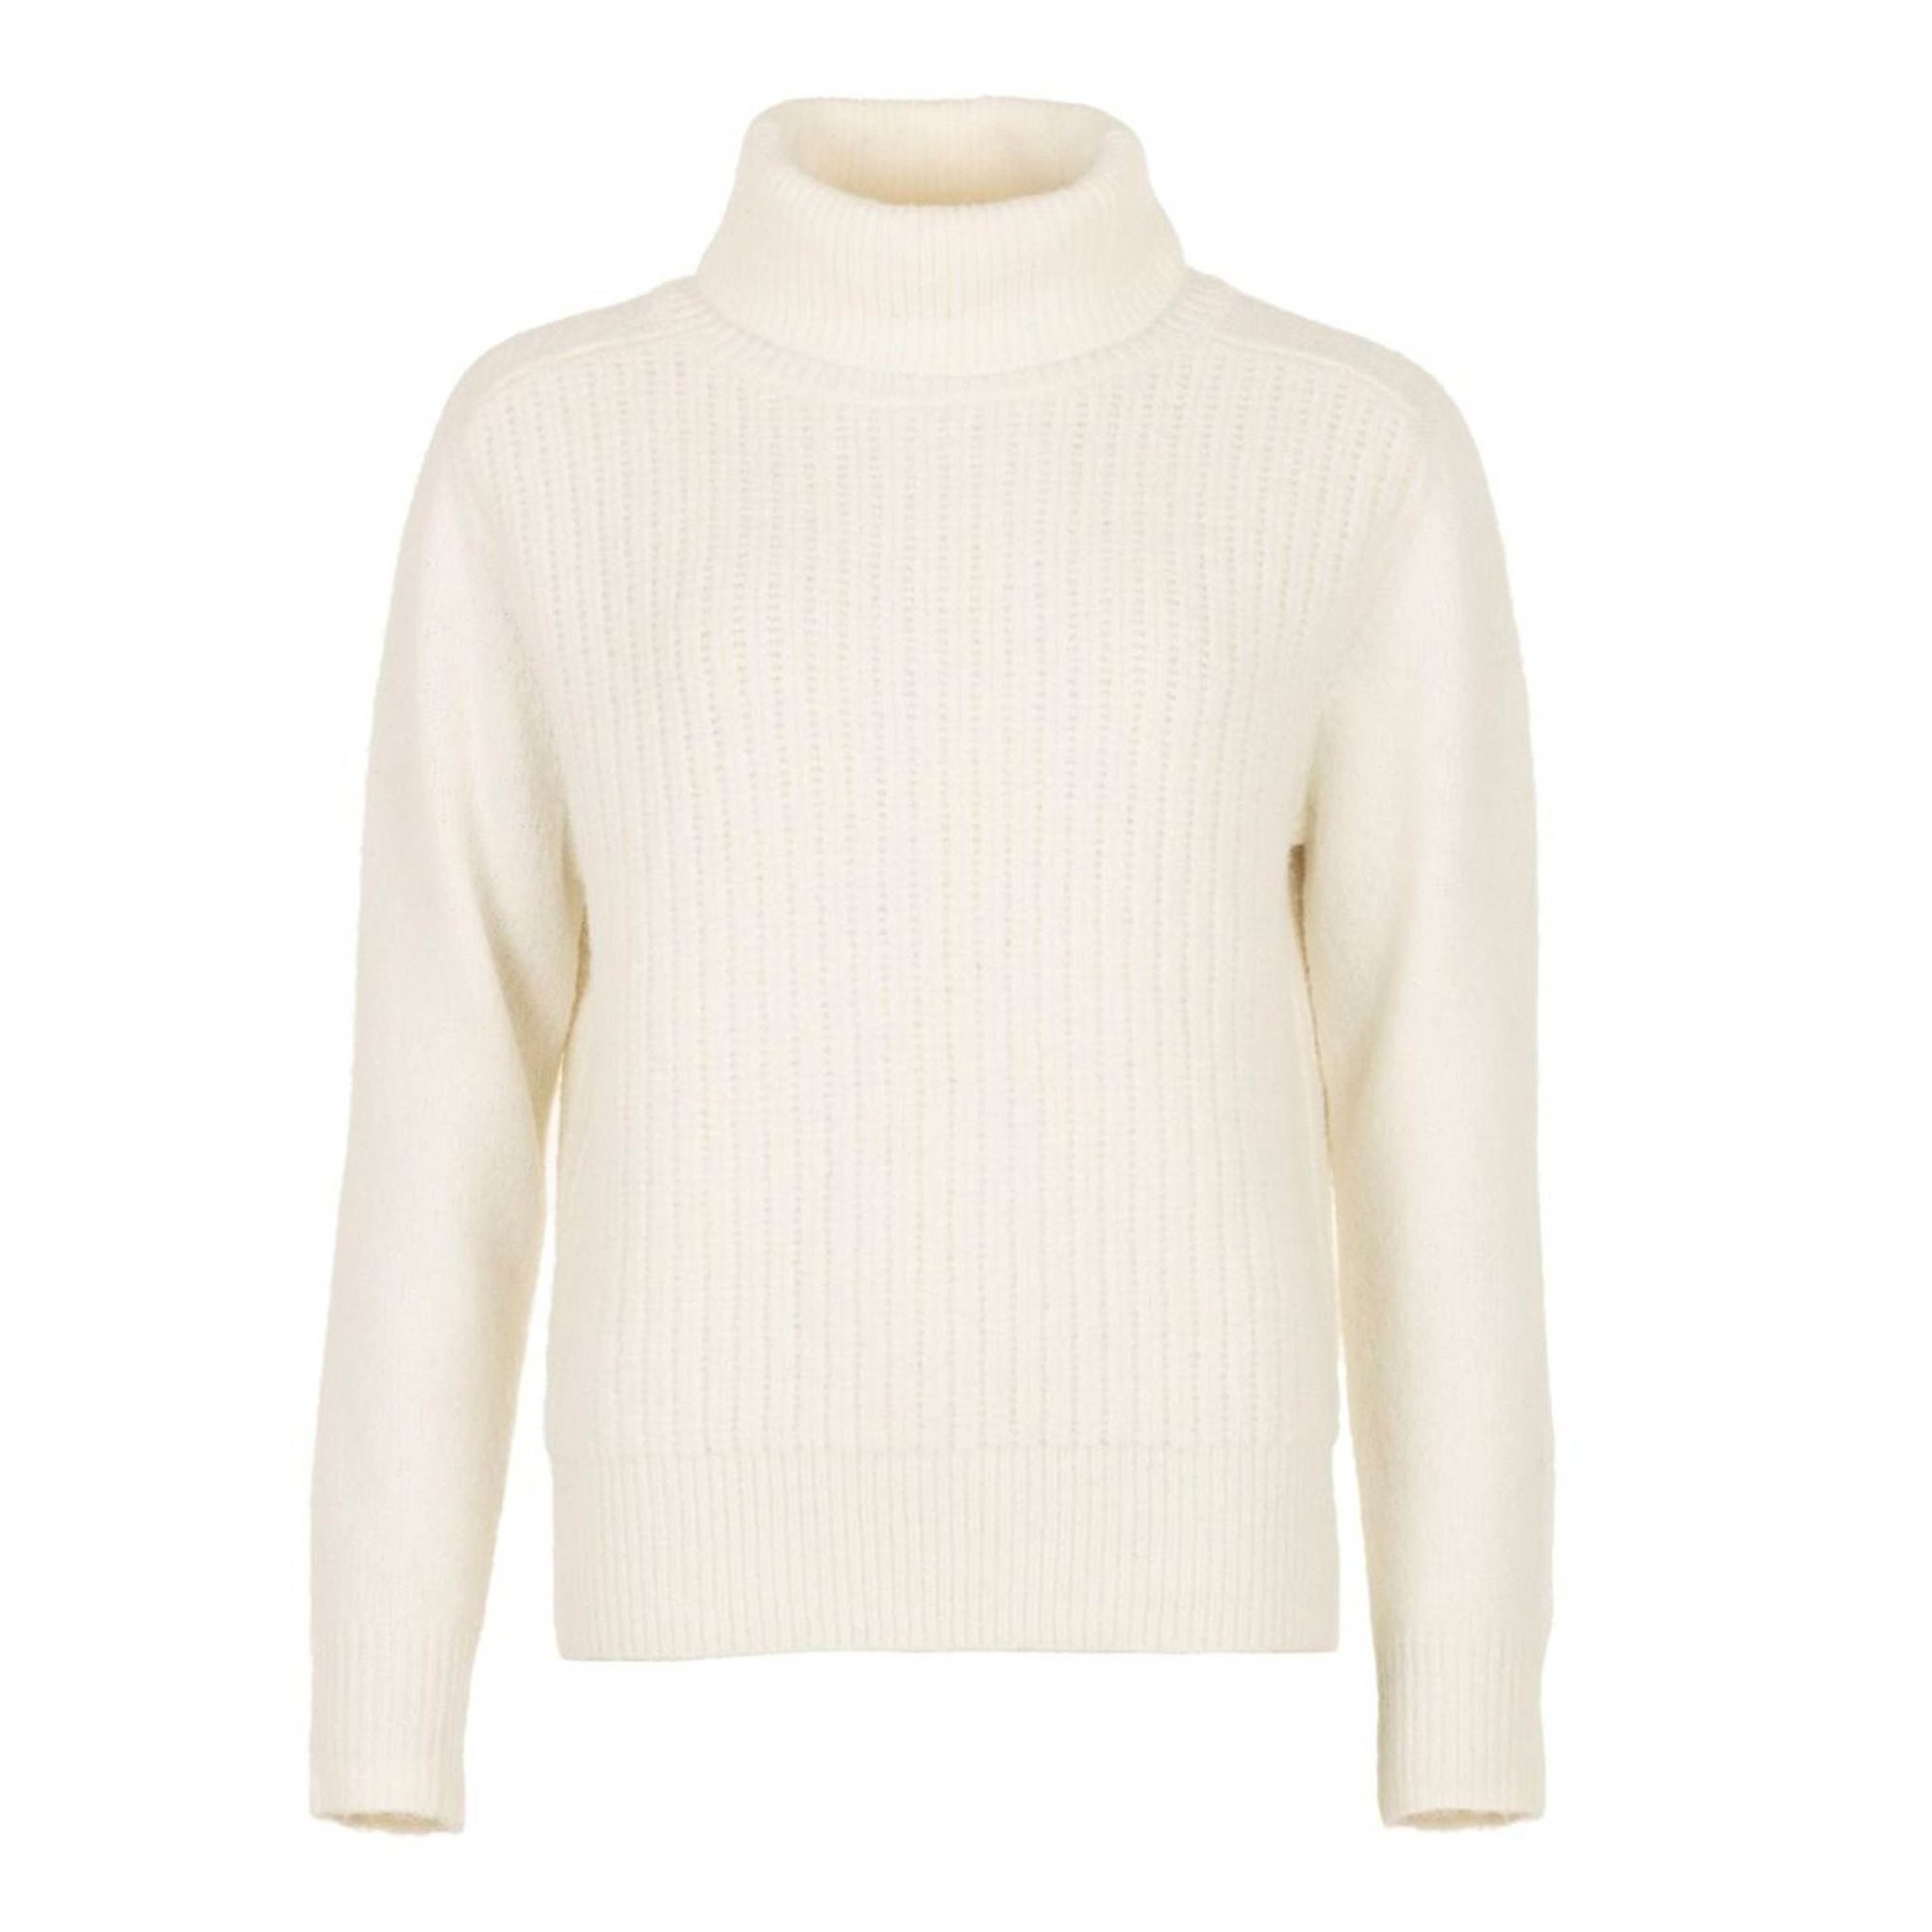 Roll neck pull soft knit UNO DUE